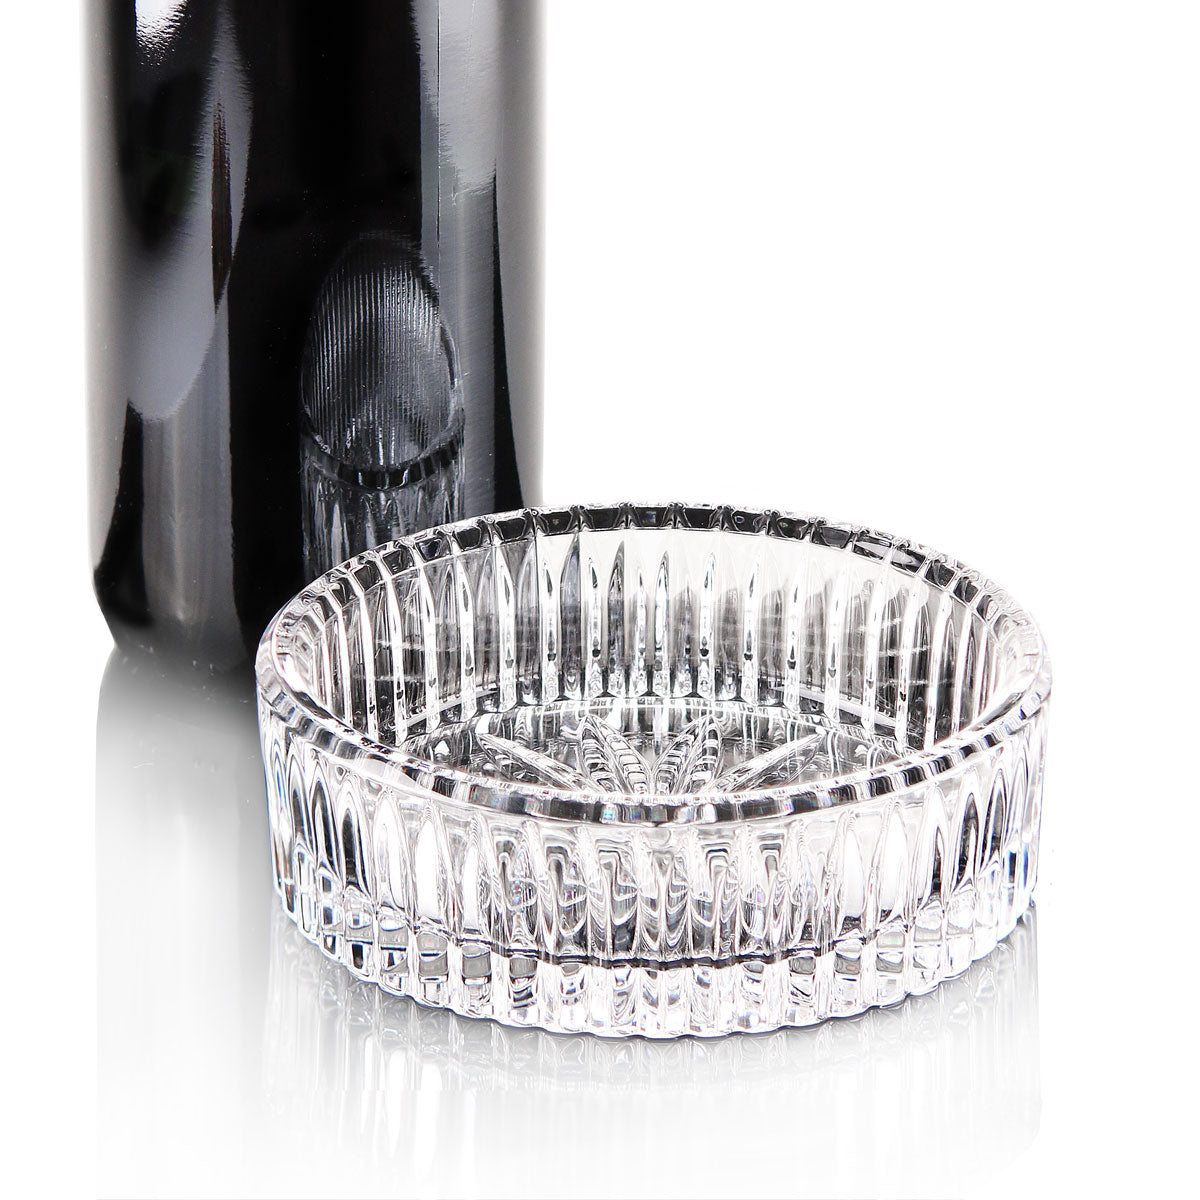 Waterford Crystal Best Wish Bottle Coaster  The Best Wishes collection takes inspiration from Waterford Crystal's renowned Millennium Collection. It retains the brilliance and clarity, while incorporating a more slender, contemporary profile. This crystal wine coaster is the ideal gift for a wine lover.